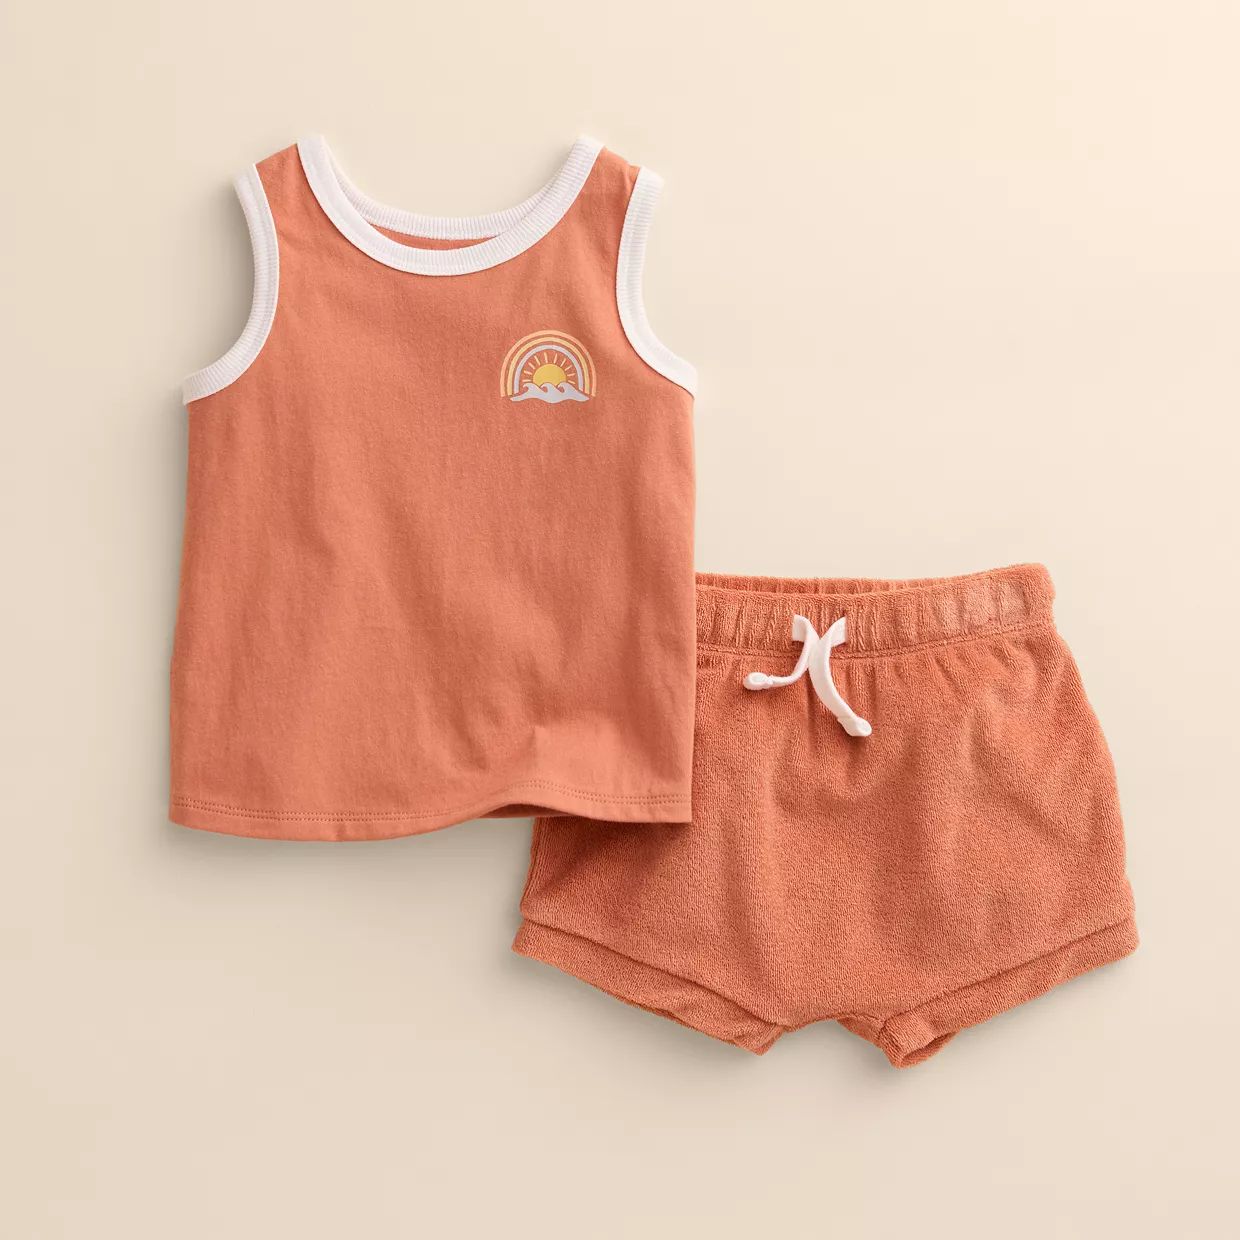 Baby Little Co. by Lauren Conrad Tank and Short Set | Kohl's